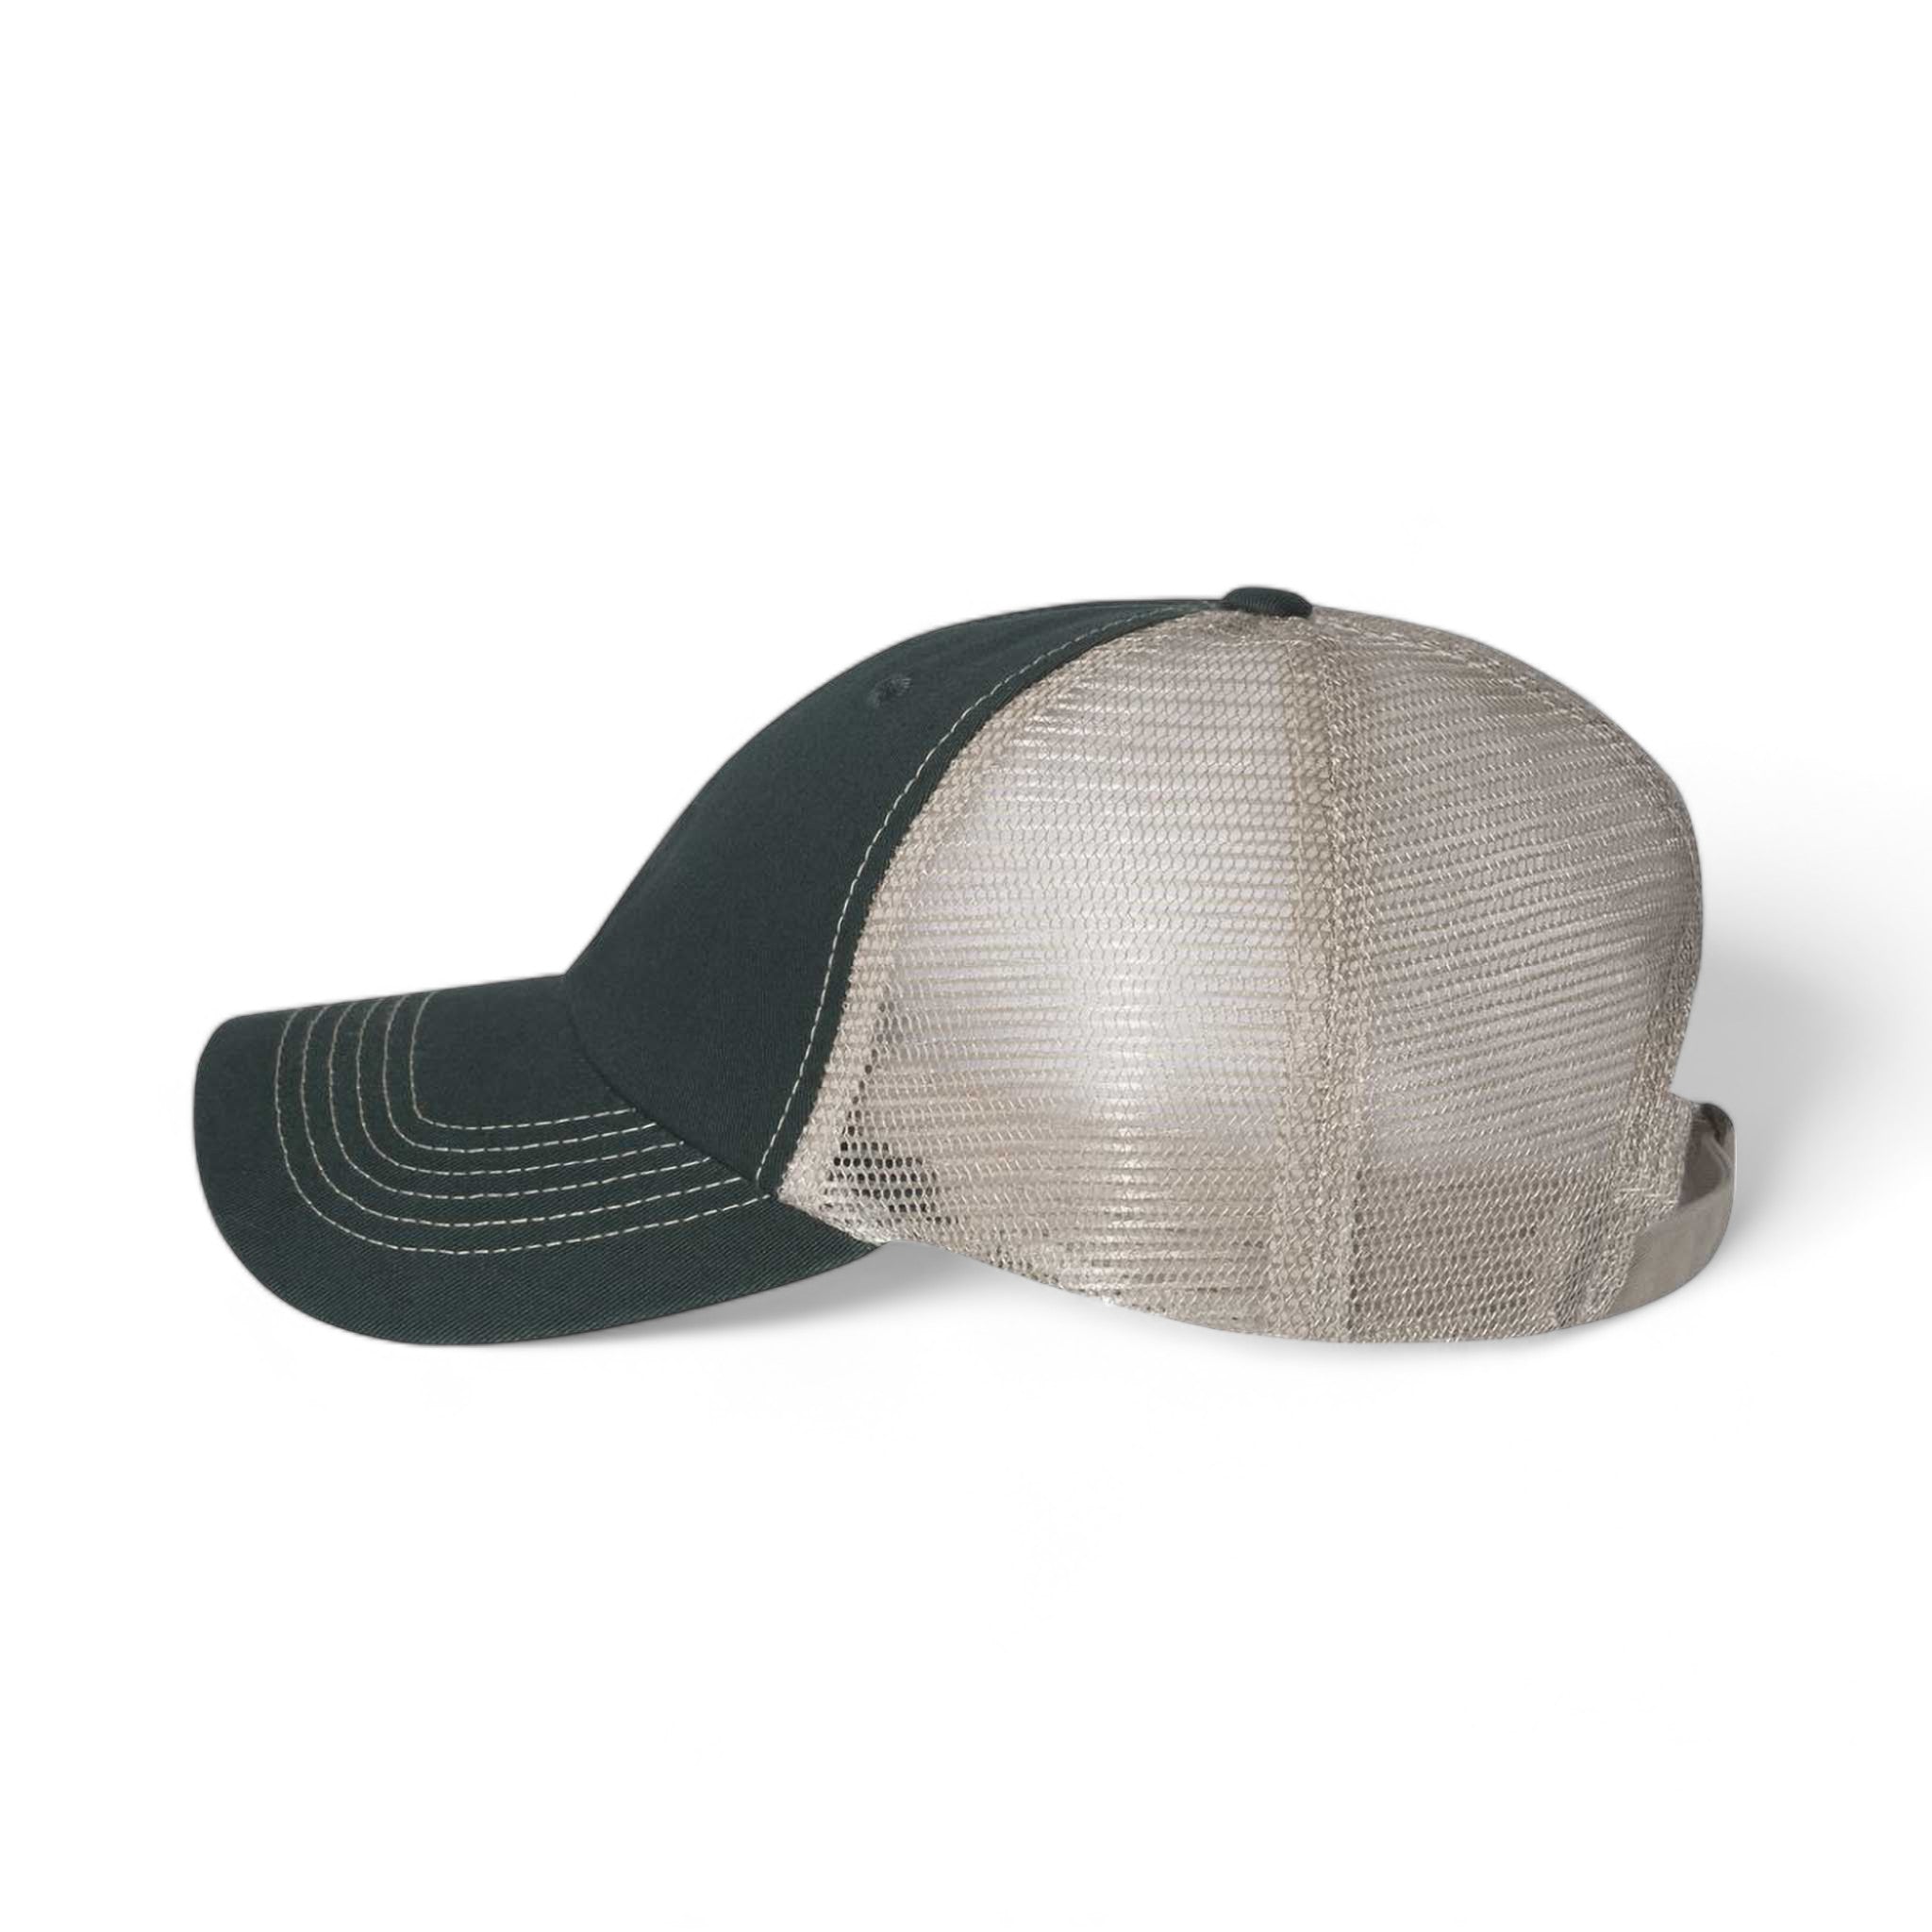 Side view of Sportsman 3100 custom hat in forest and khaki